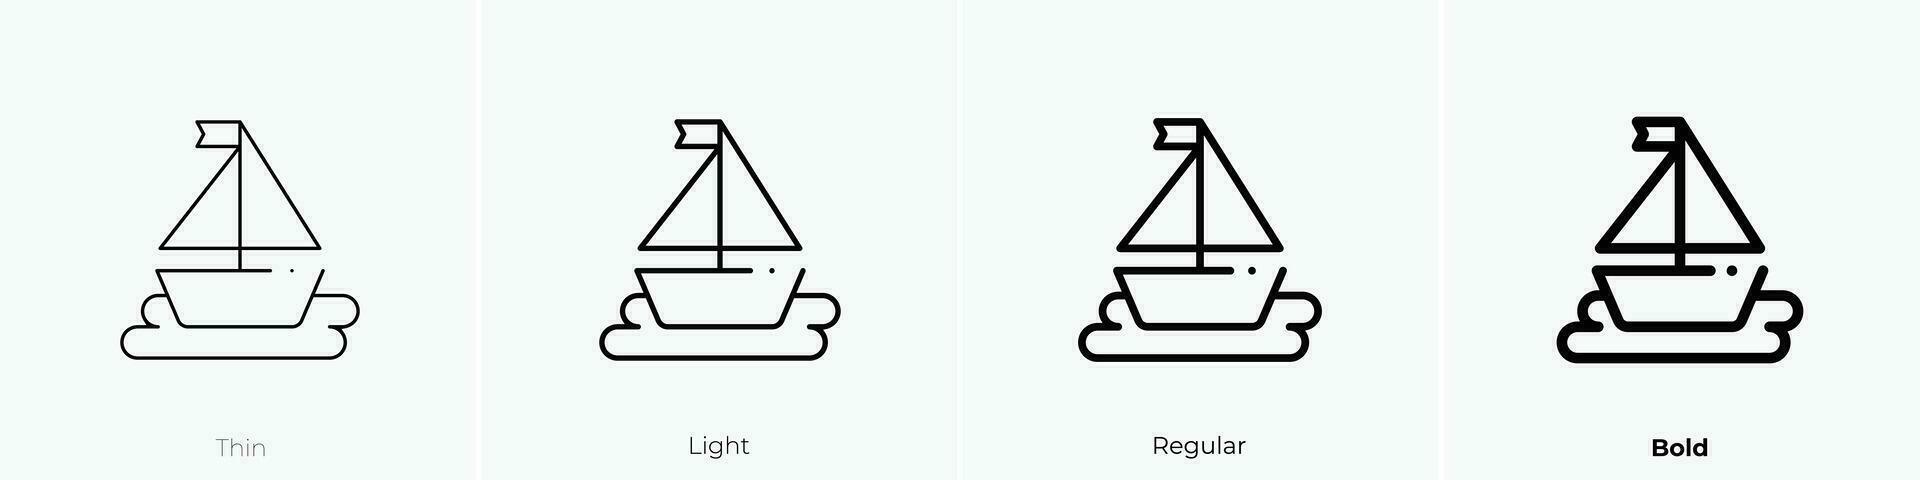 sail boat icon. Thin, Light, Regular And Bold style design isolated on white background vector